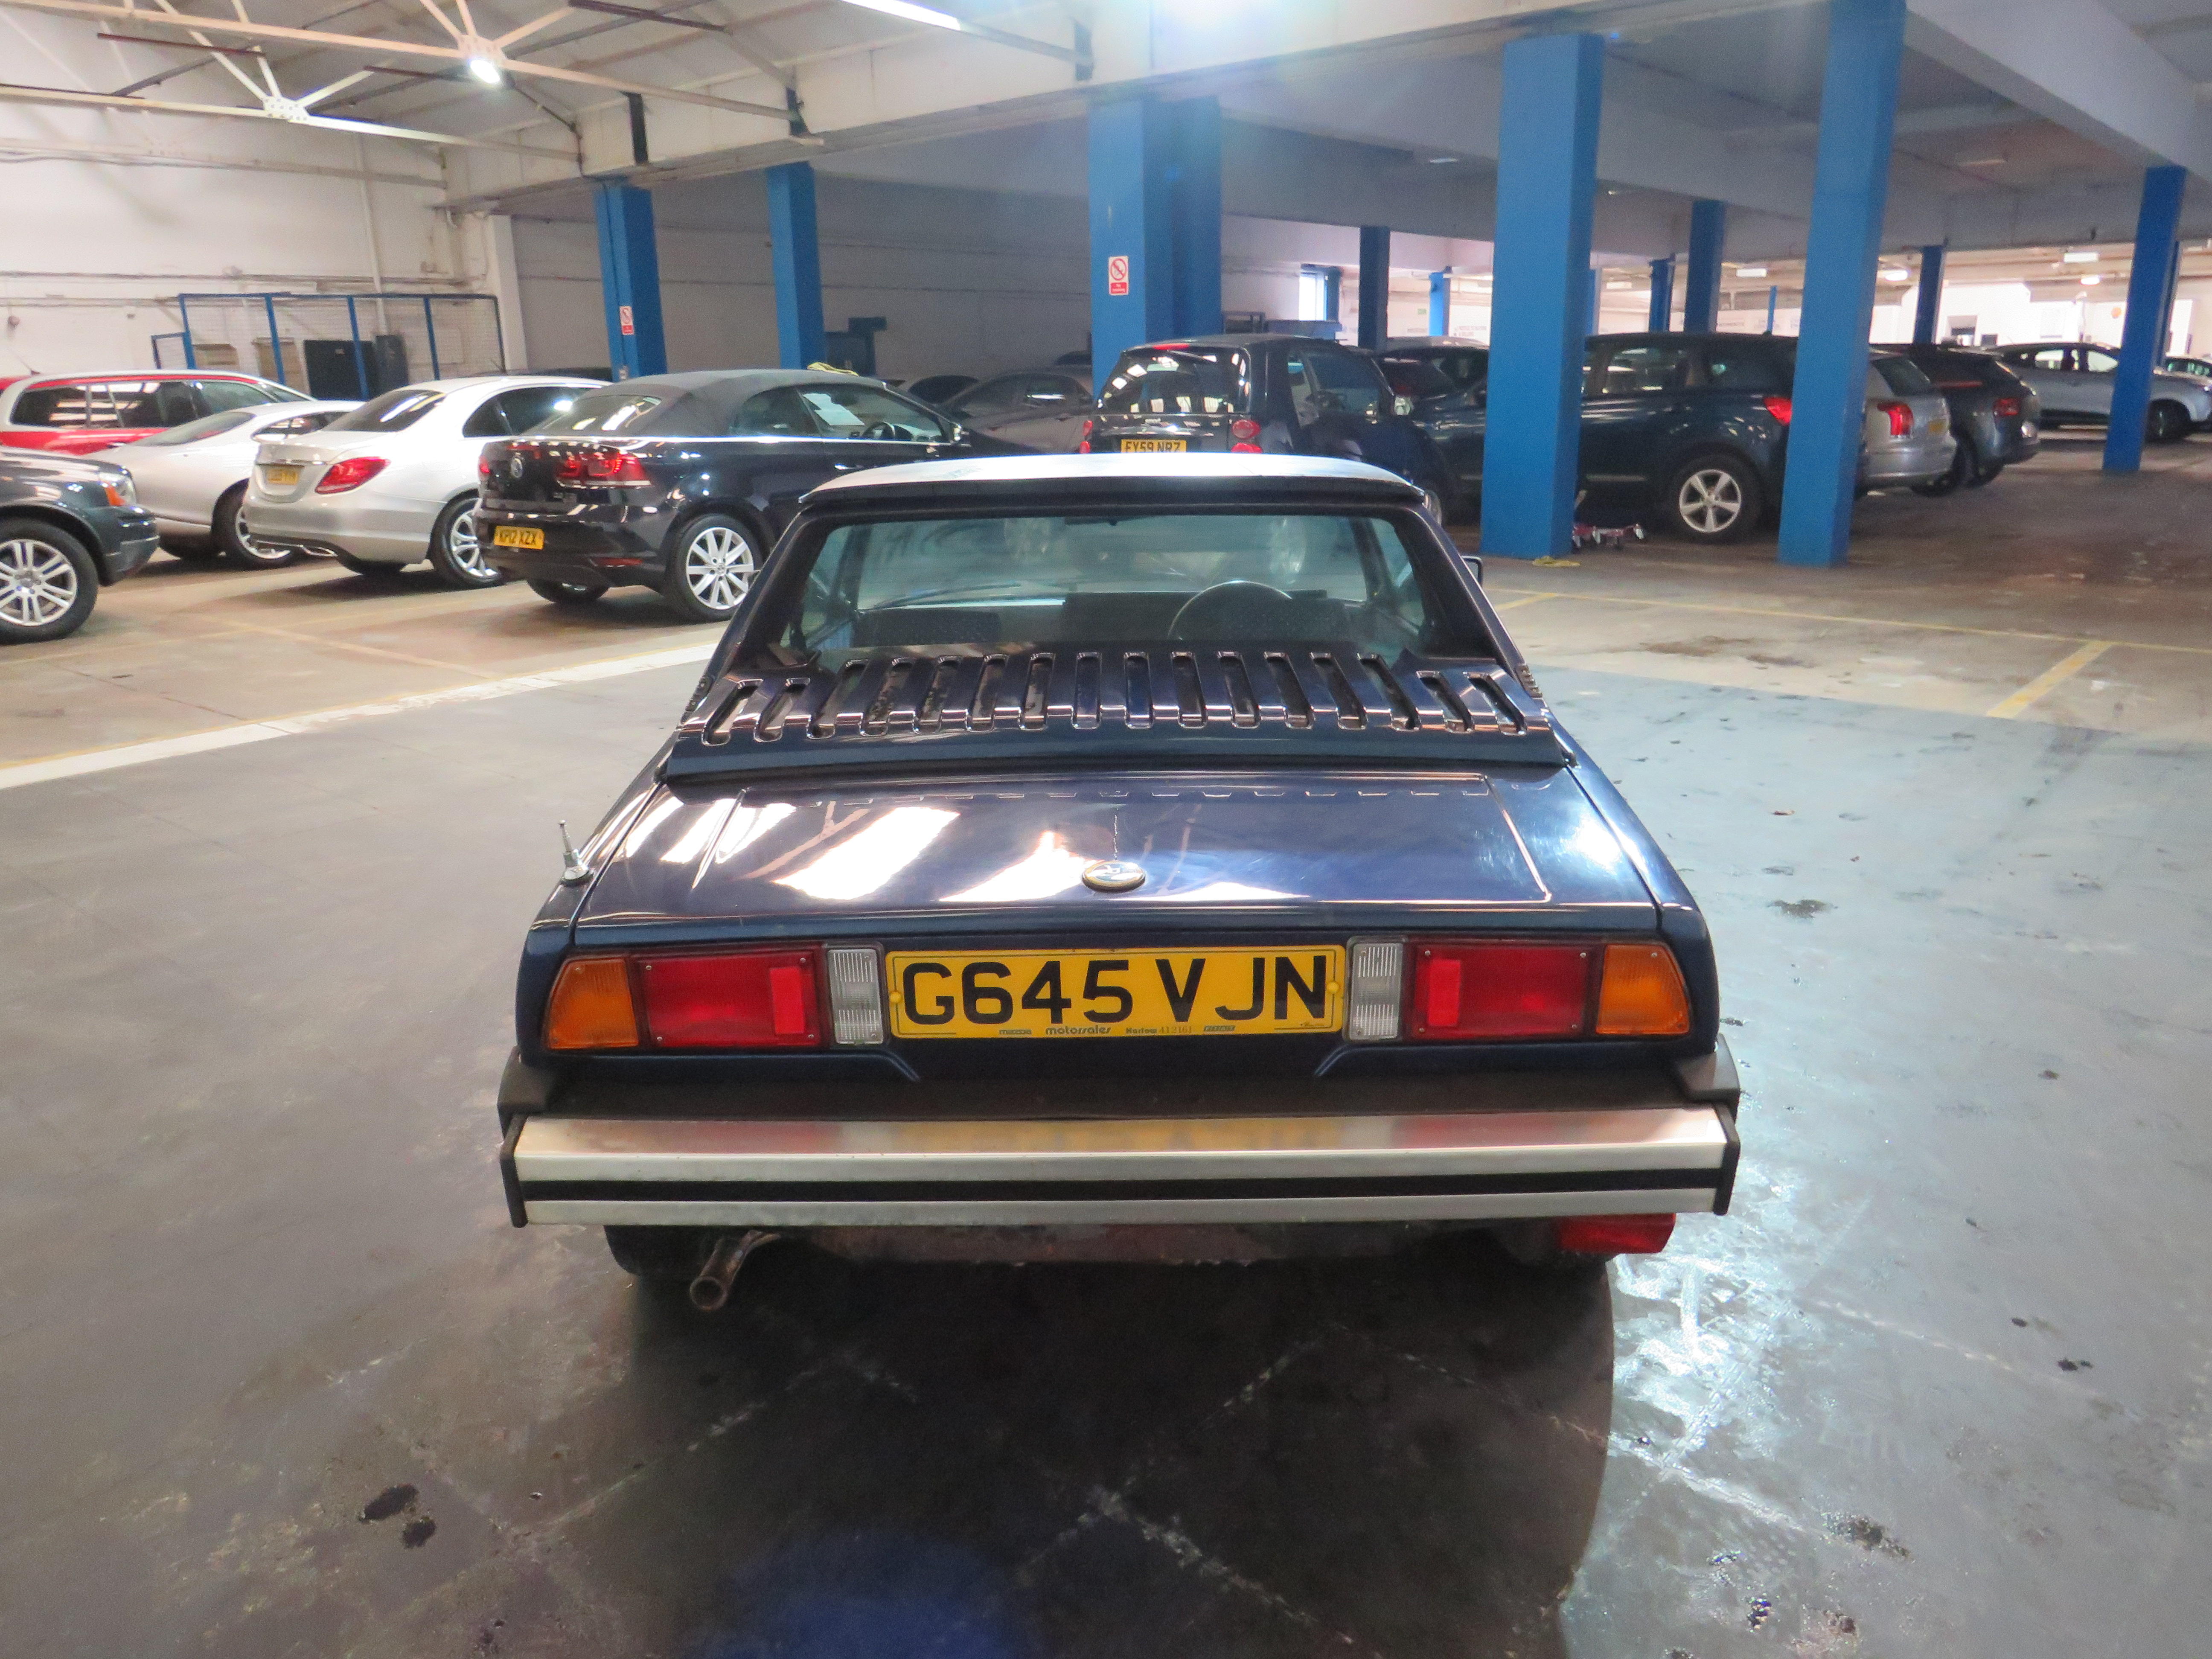 1989 Fiat X1/9 Gran Finale - 1498cc - ONE OWNER FROM NEW - Image 9 of 38